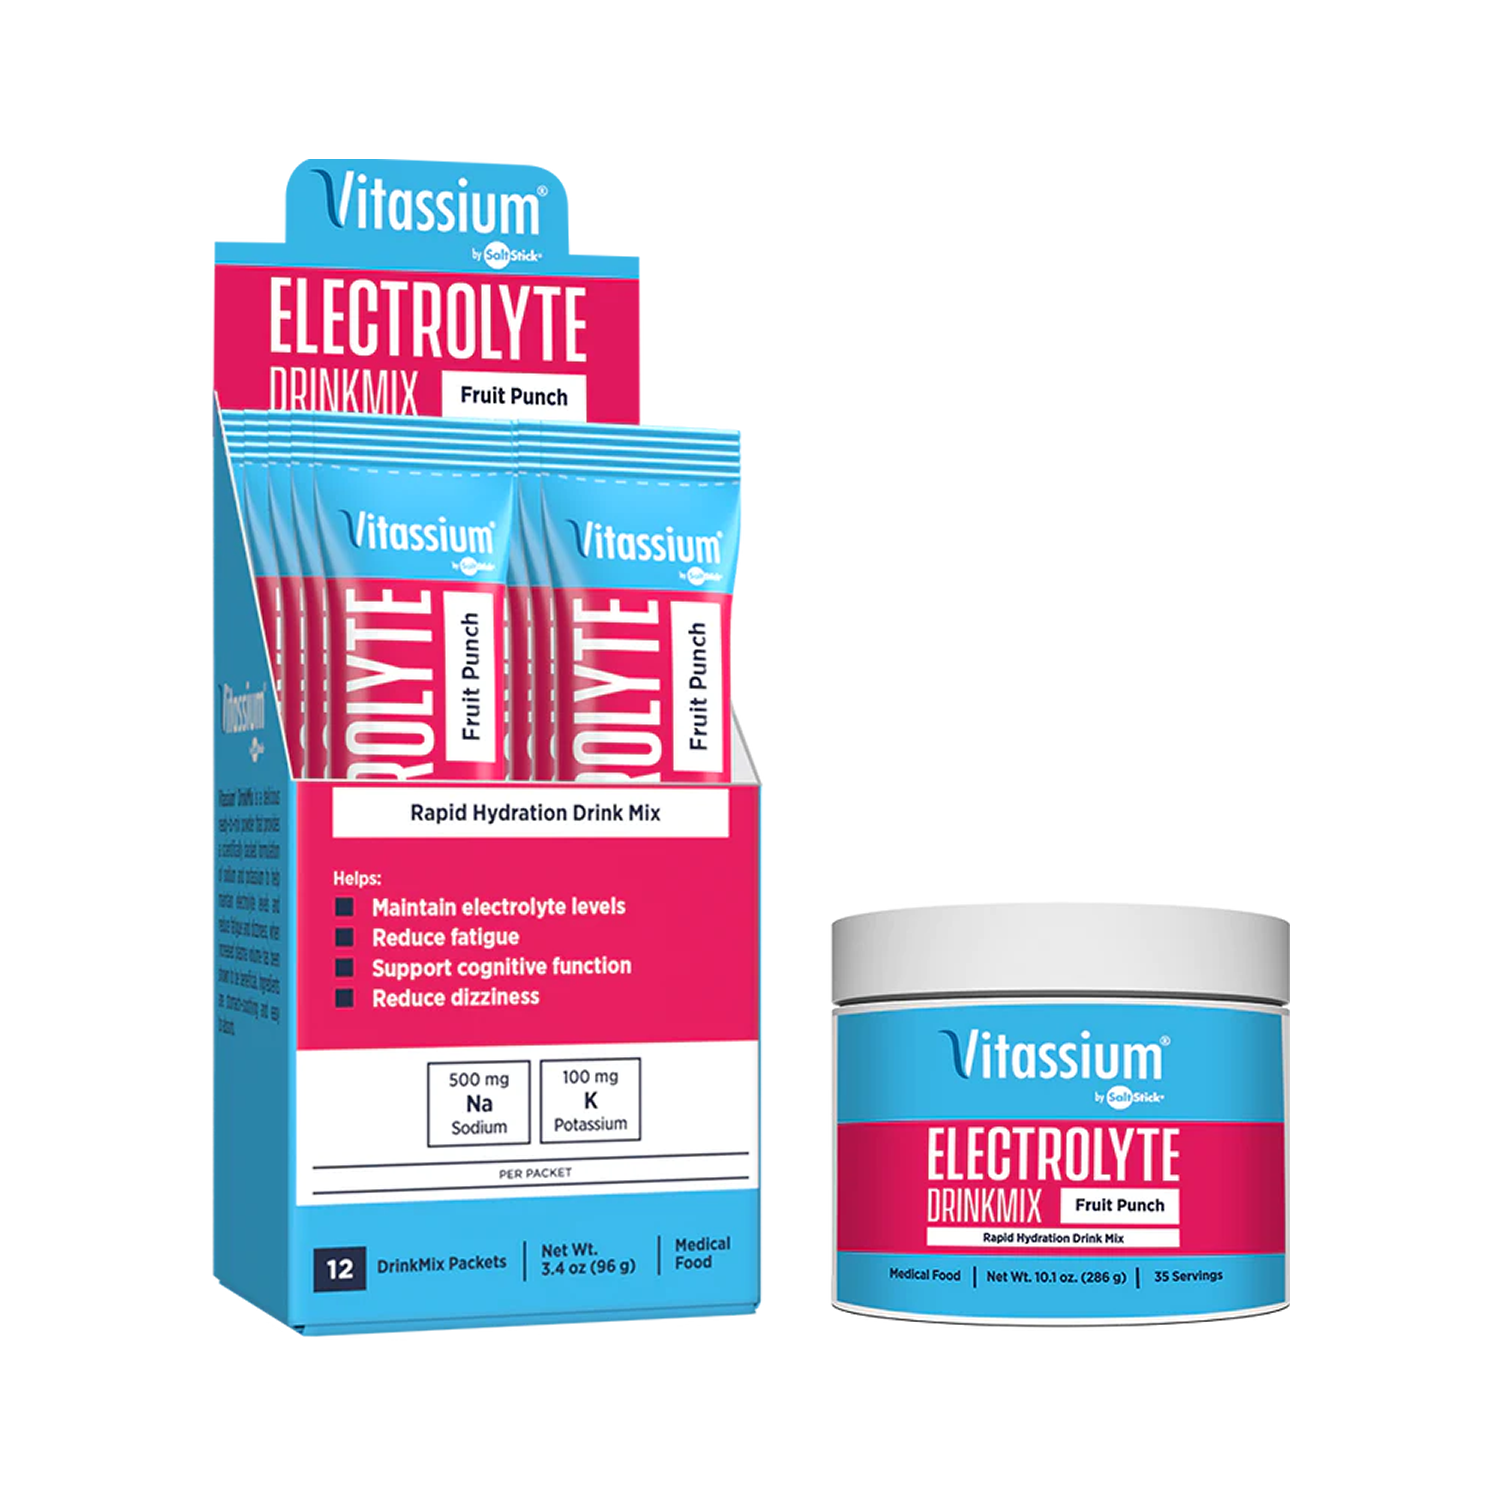 Vitassium Electrolyte Drink Mix Fruit Punch stick packets and tub